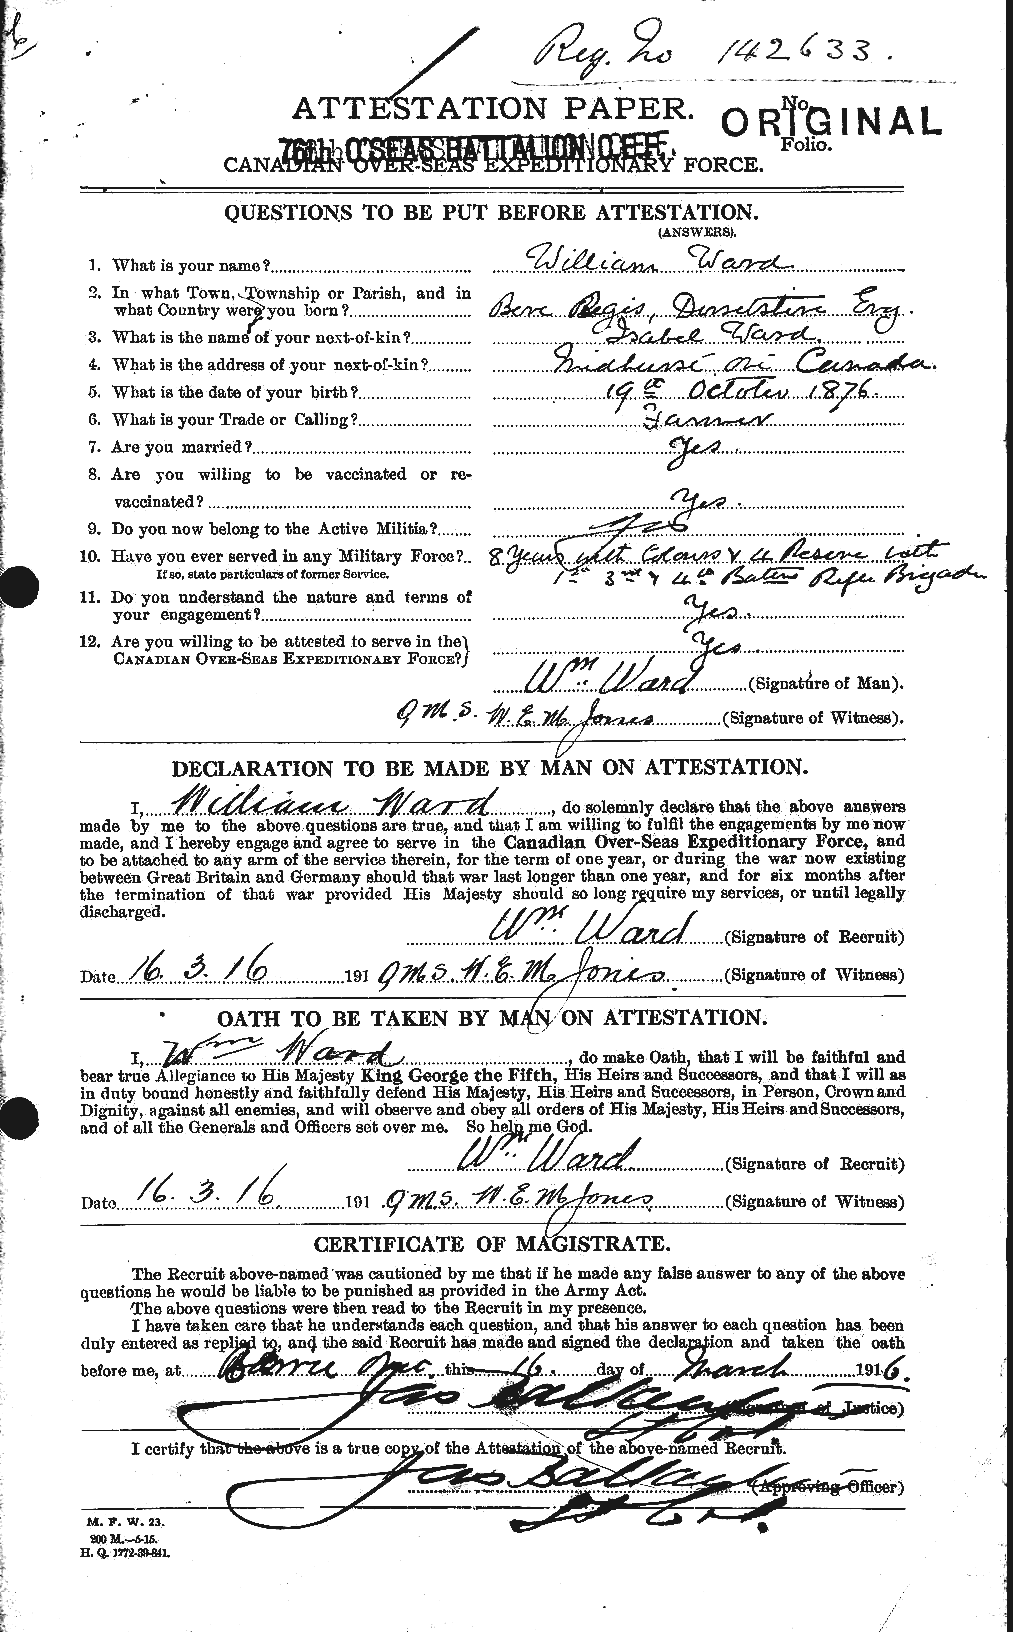 Personnel Records of the First World War - CEF 659784a